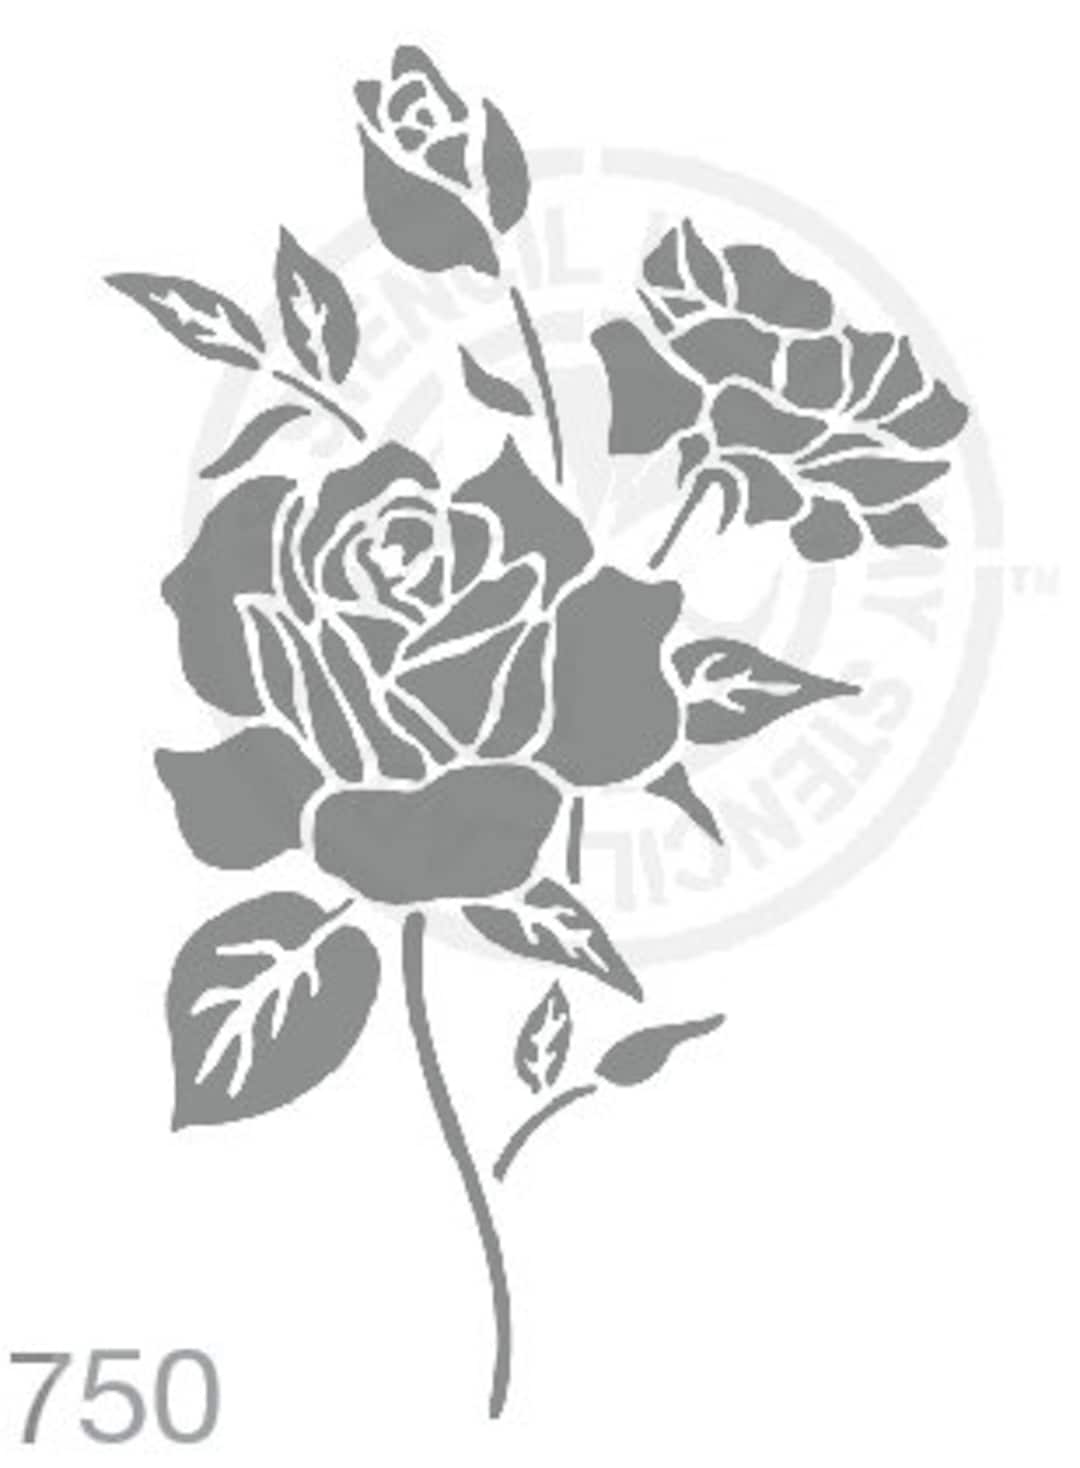 Buy Stencil - Layered Rose Bunch 4x8 2 Pcs Online